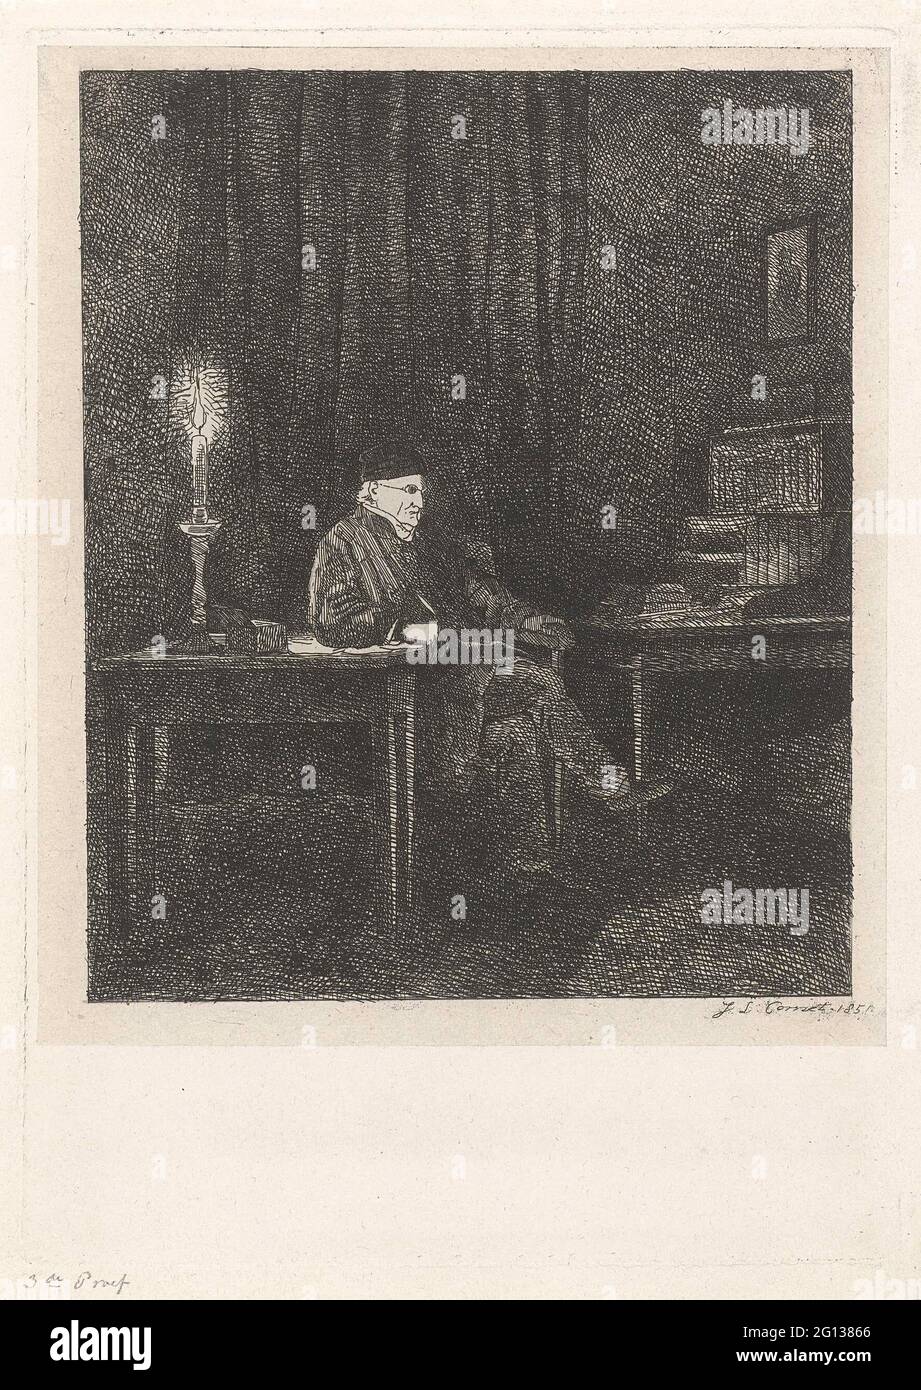 Portrait of humbert de superville. Portrait of David Pierre Giottino Humbert de Superville, an artist and art collector. Humbert de Superville is sitting at his desk. The room is only lit by a candle. Stock Photo